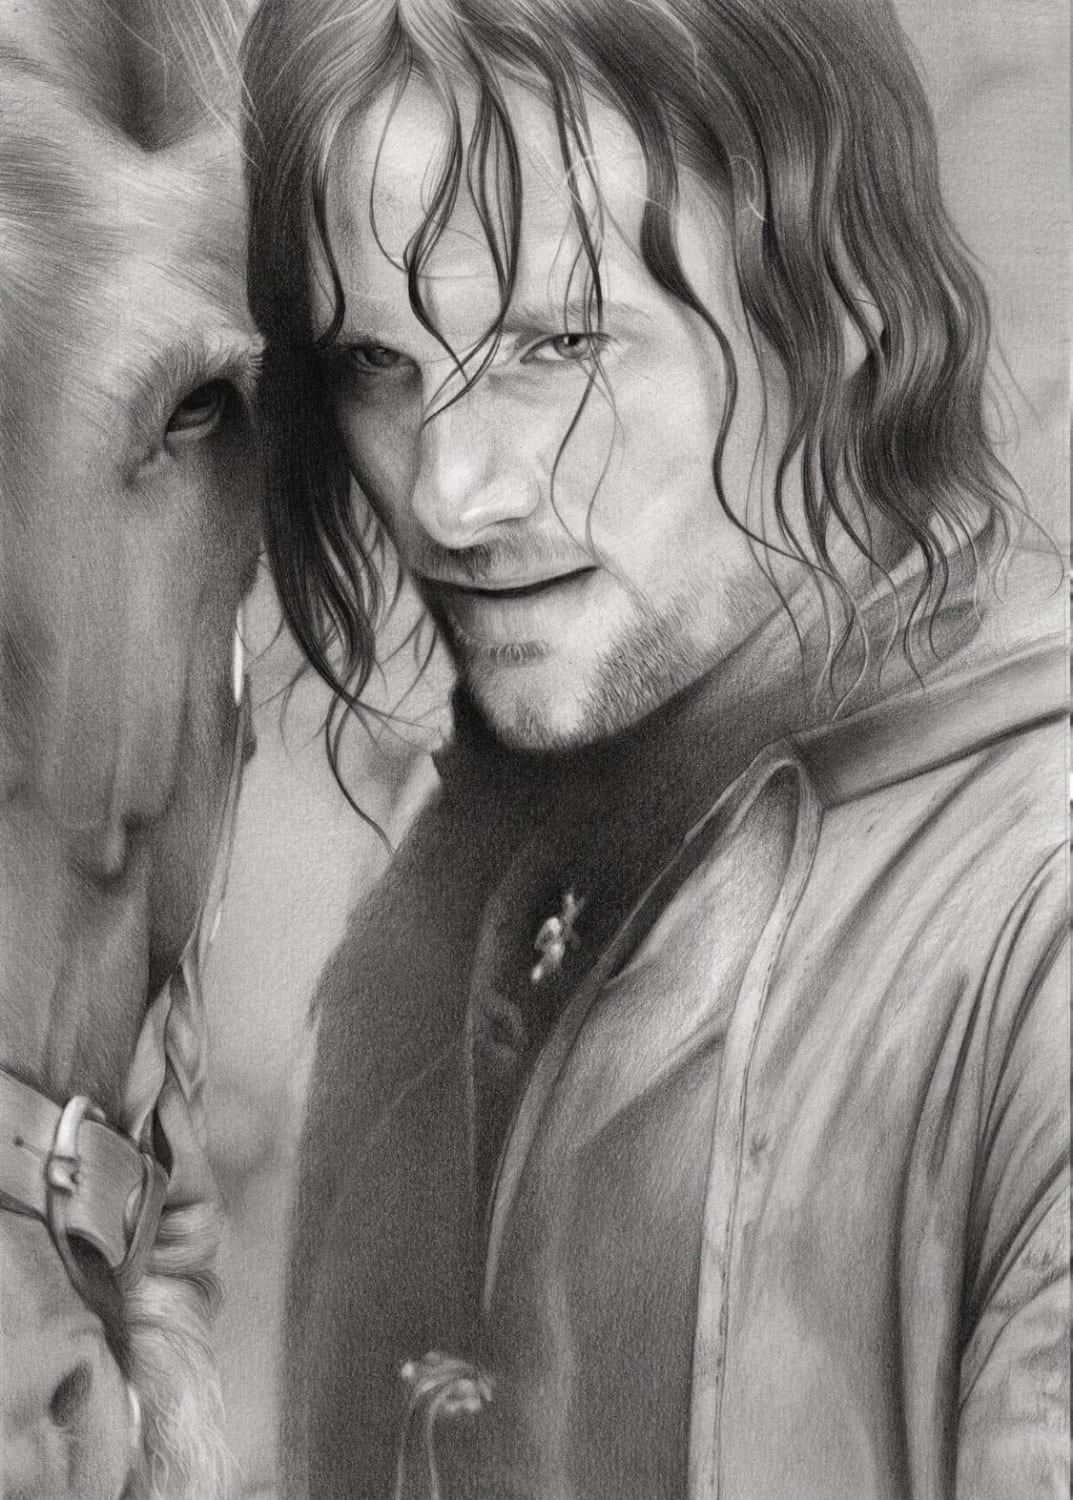 My gf is a massive fan of both horses and LOTR so I did this drawing for her what do you think?